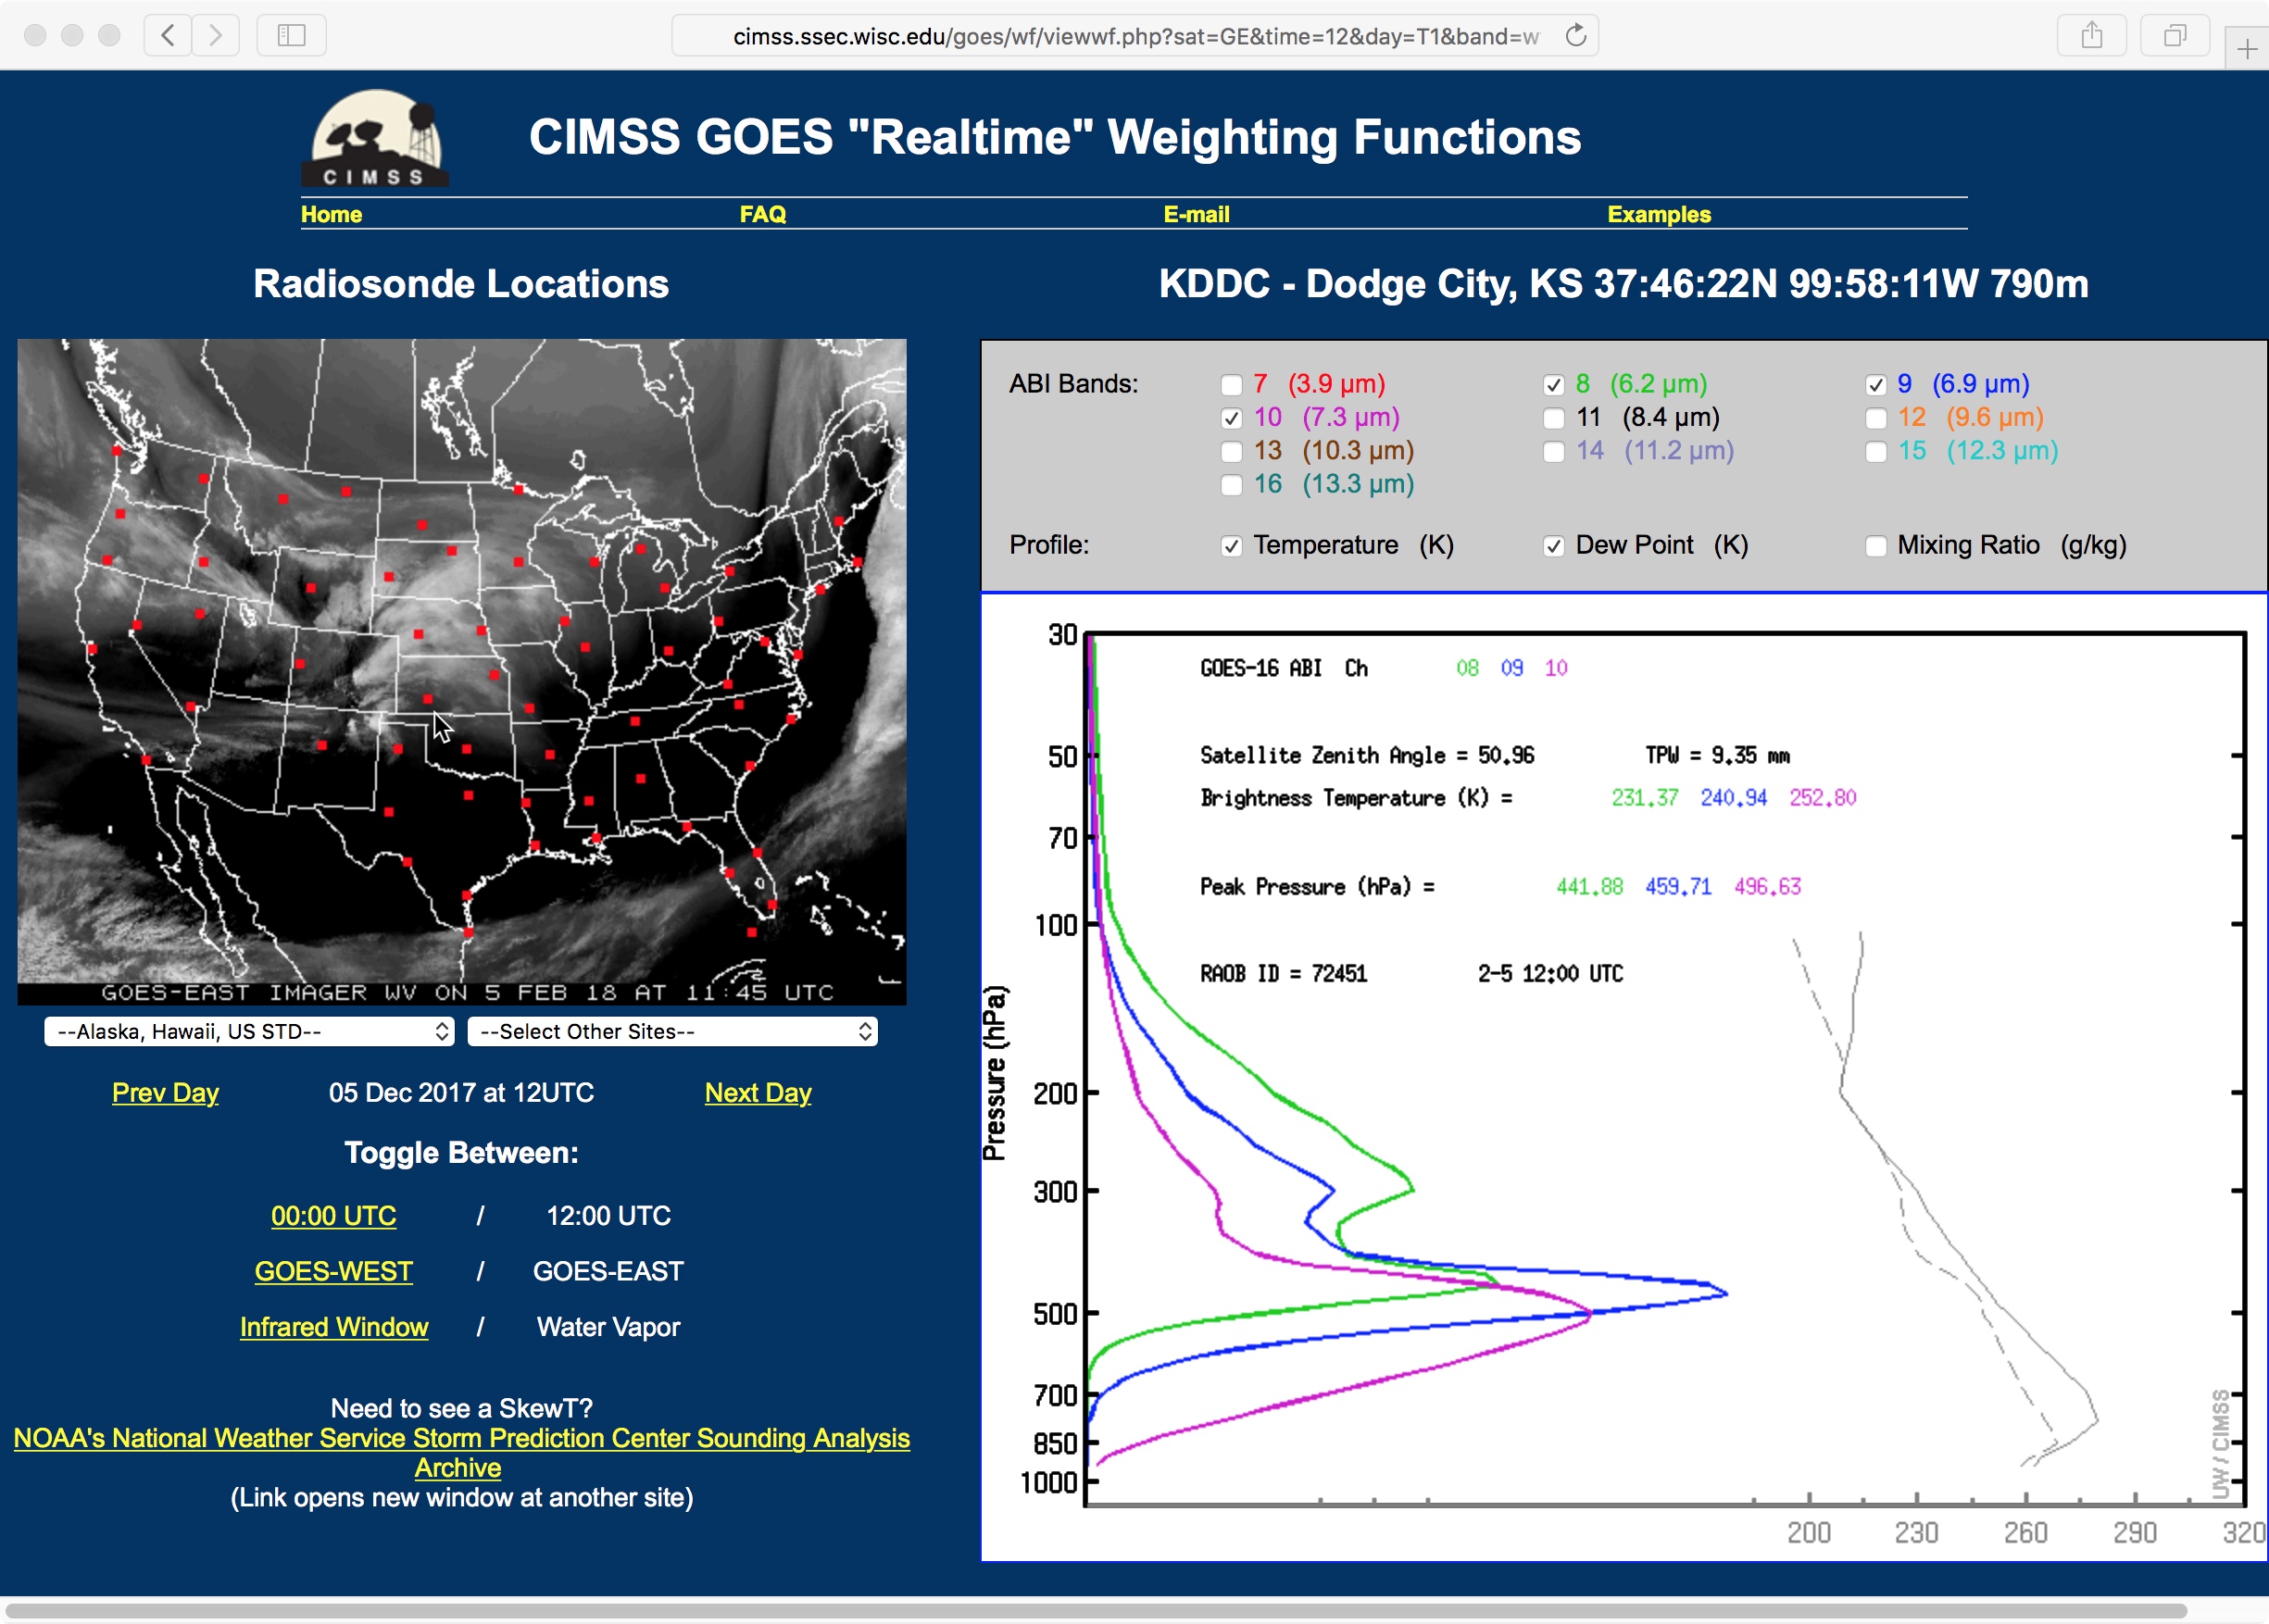 Weighting function plots for each of the three GOES-16 Water Vapor bands, calculated using 05 February/12 UTC rawinsonde data from Dodge City, Kansas [click to enlarge]